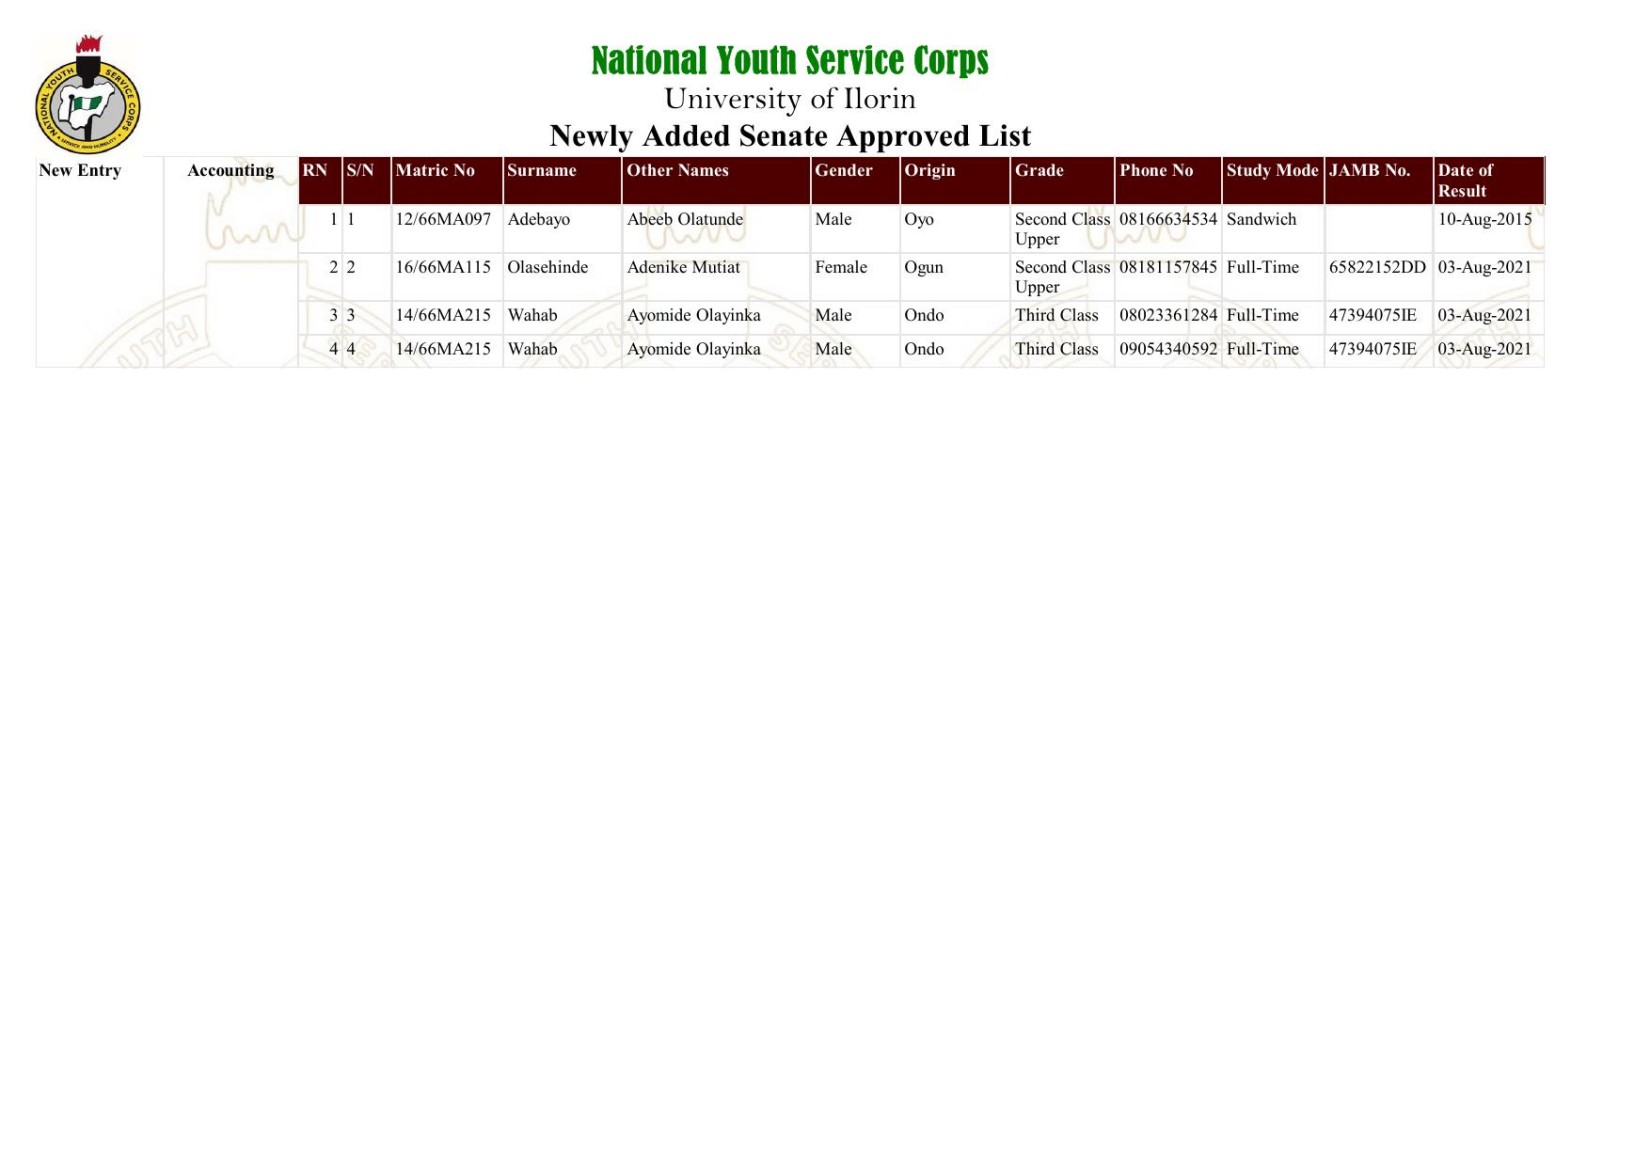 NATIONAL YOUTH SERVICE CORPS